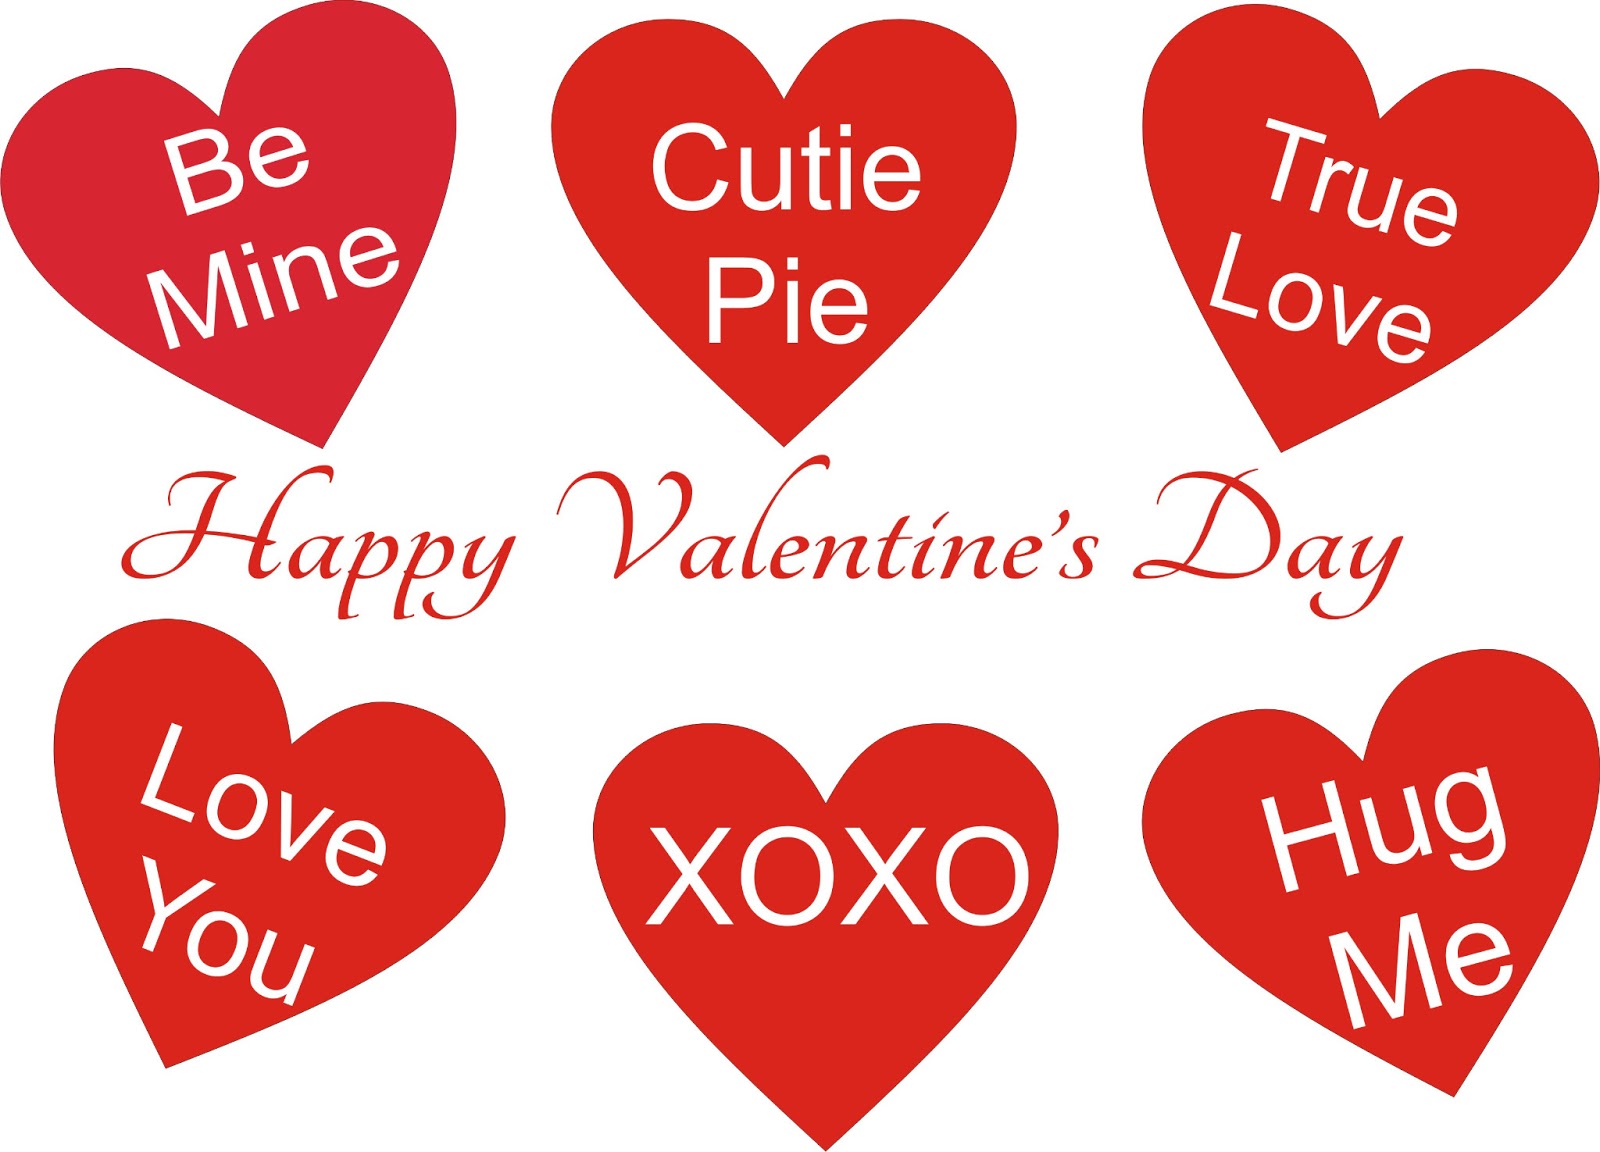 Valentines day Image HD Download For Whatsapp Facebook Husband. Happy Valentines Day Image With Quotes for Him Her